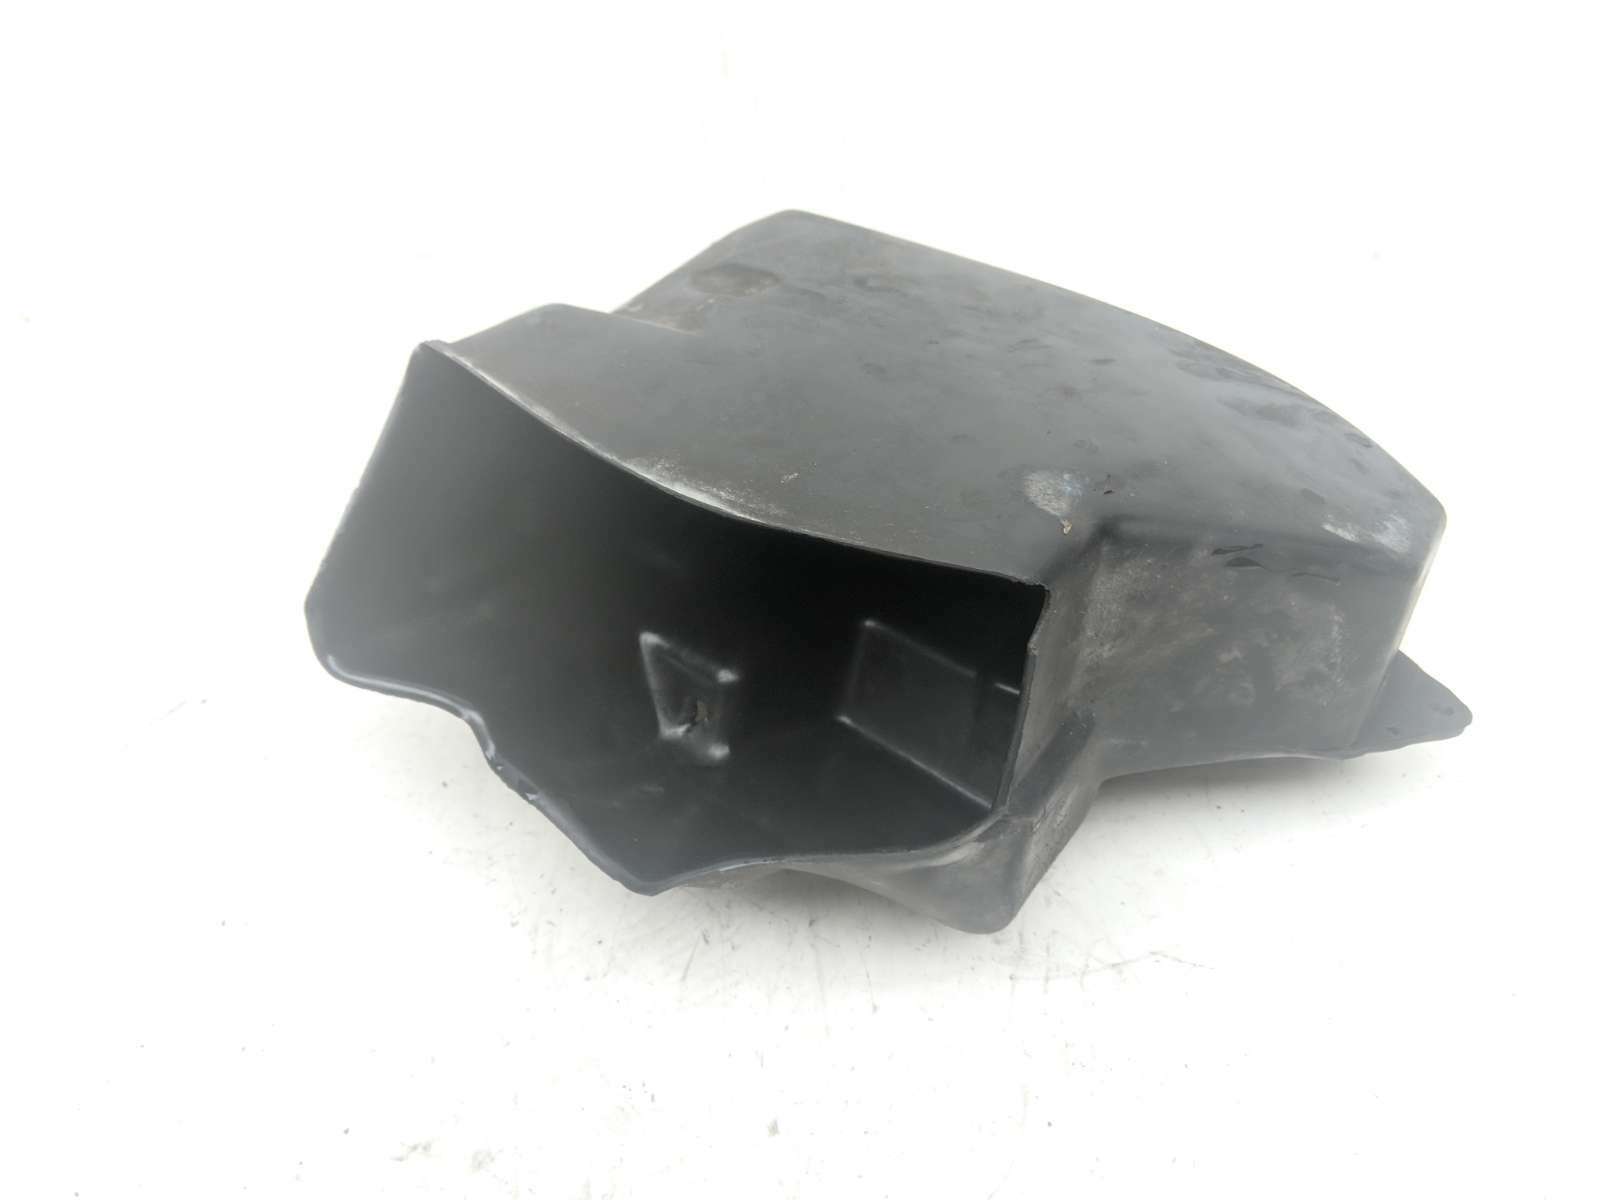 97 BMW R1100 RT Intake Air Box Filter Cleaner Cover